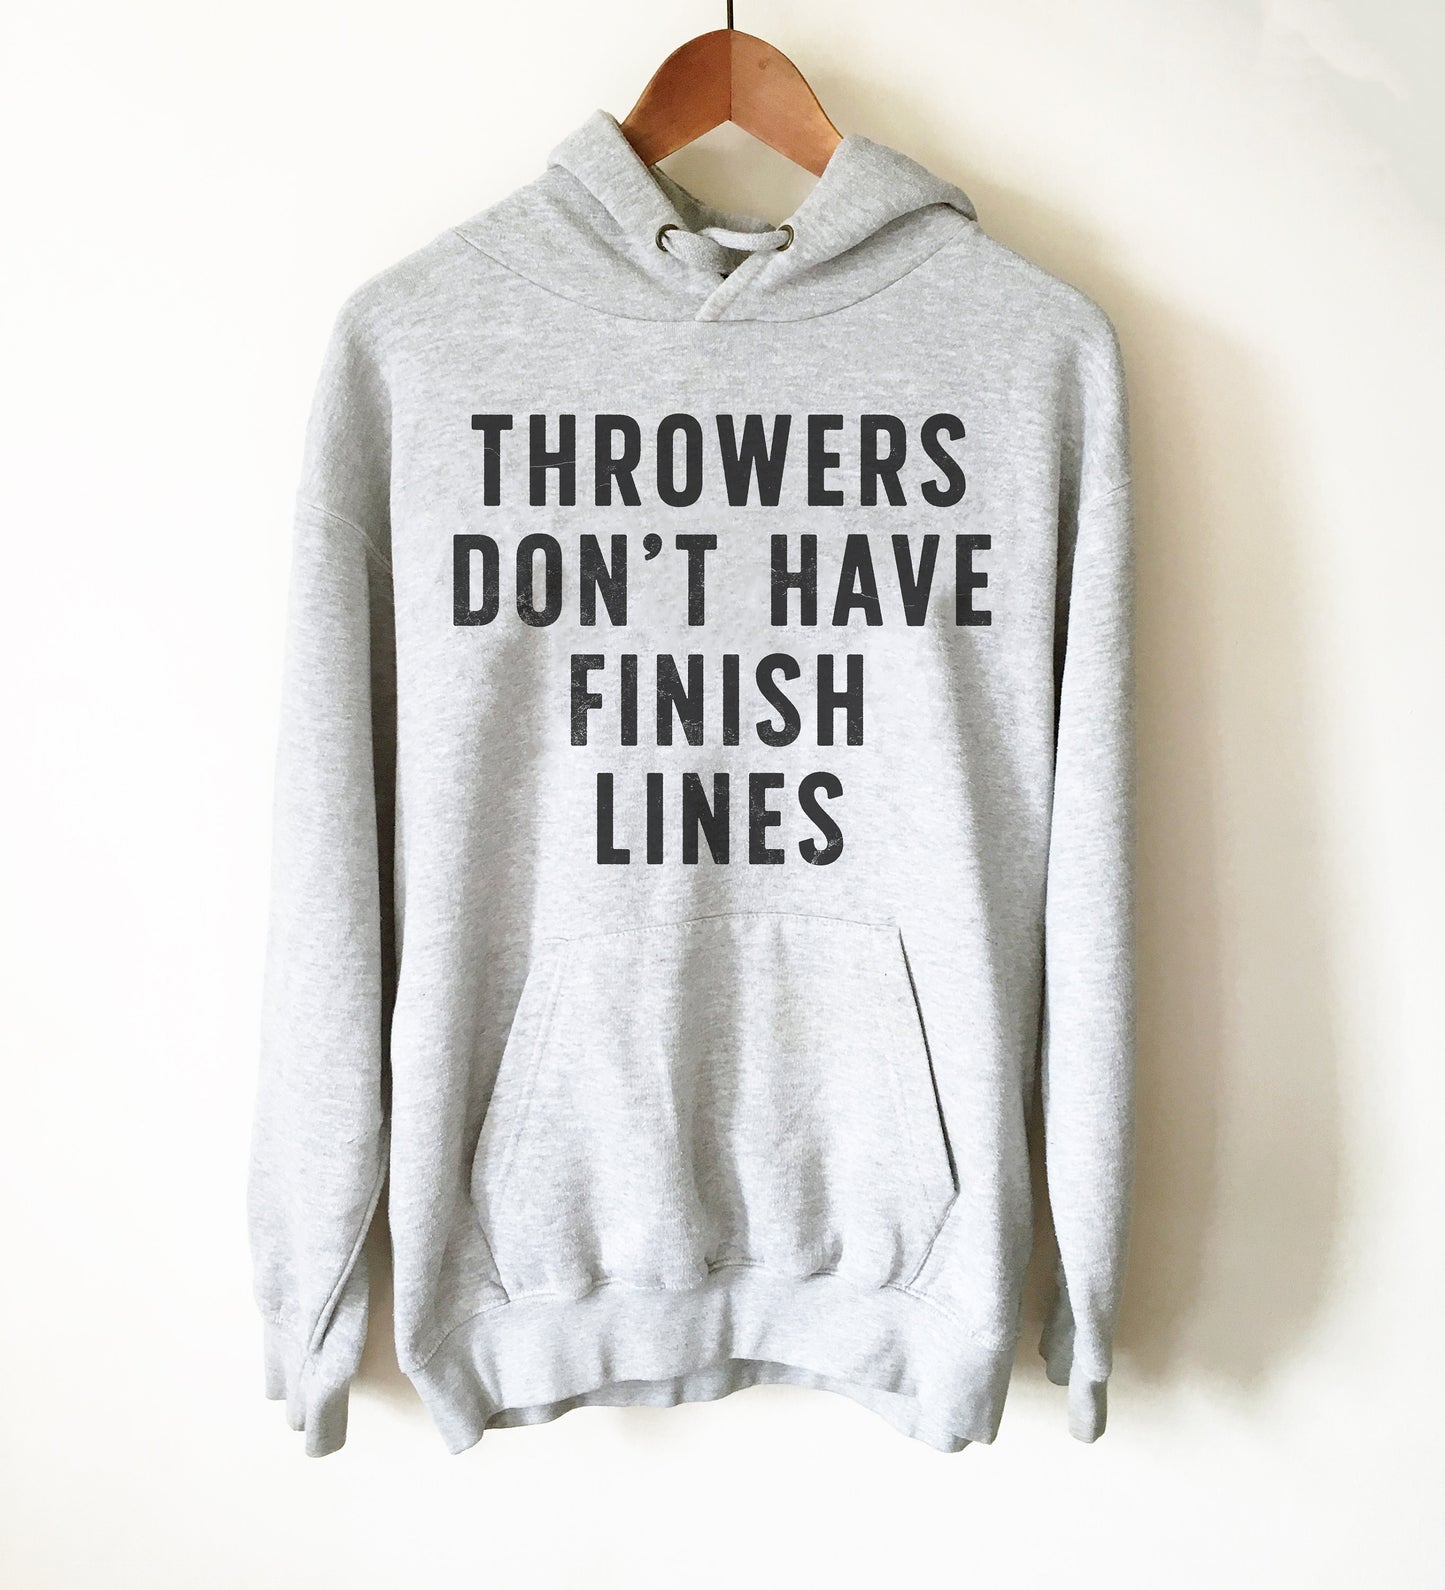 Throwers Don't Have Finish Lines Hoodie-Athlete Gift, Athletics Shirt, Coach Gift, Coach Shirt, Sports Fan Gift, Team TShirts, Javelin Shirt